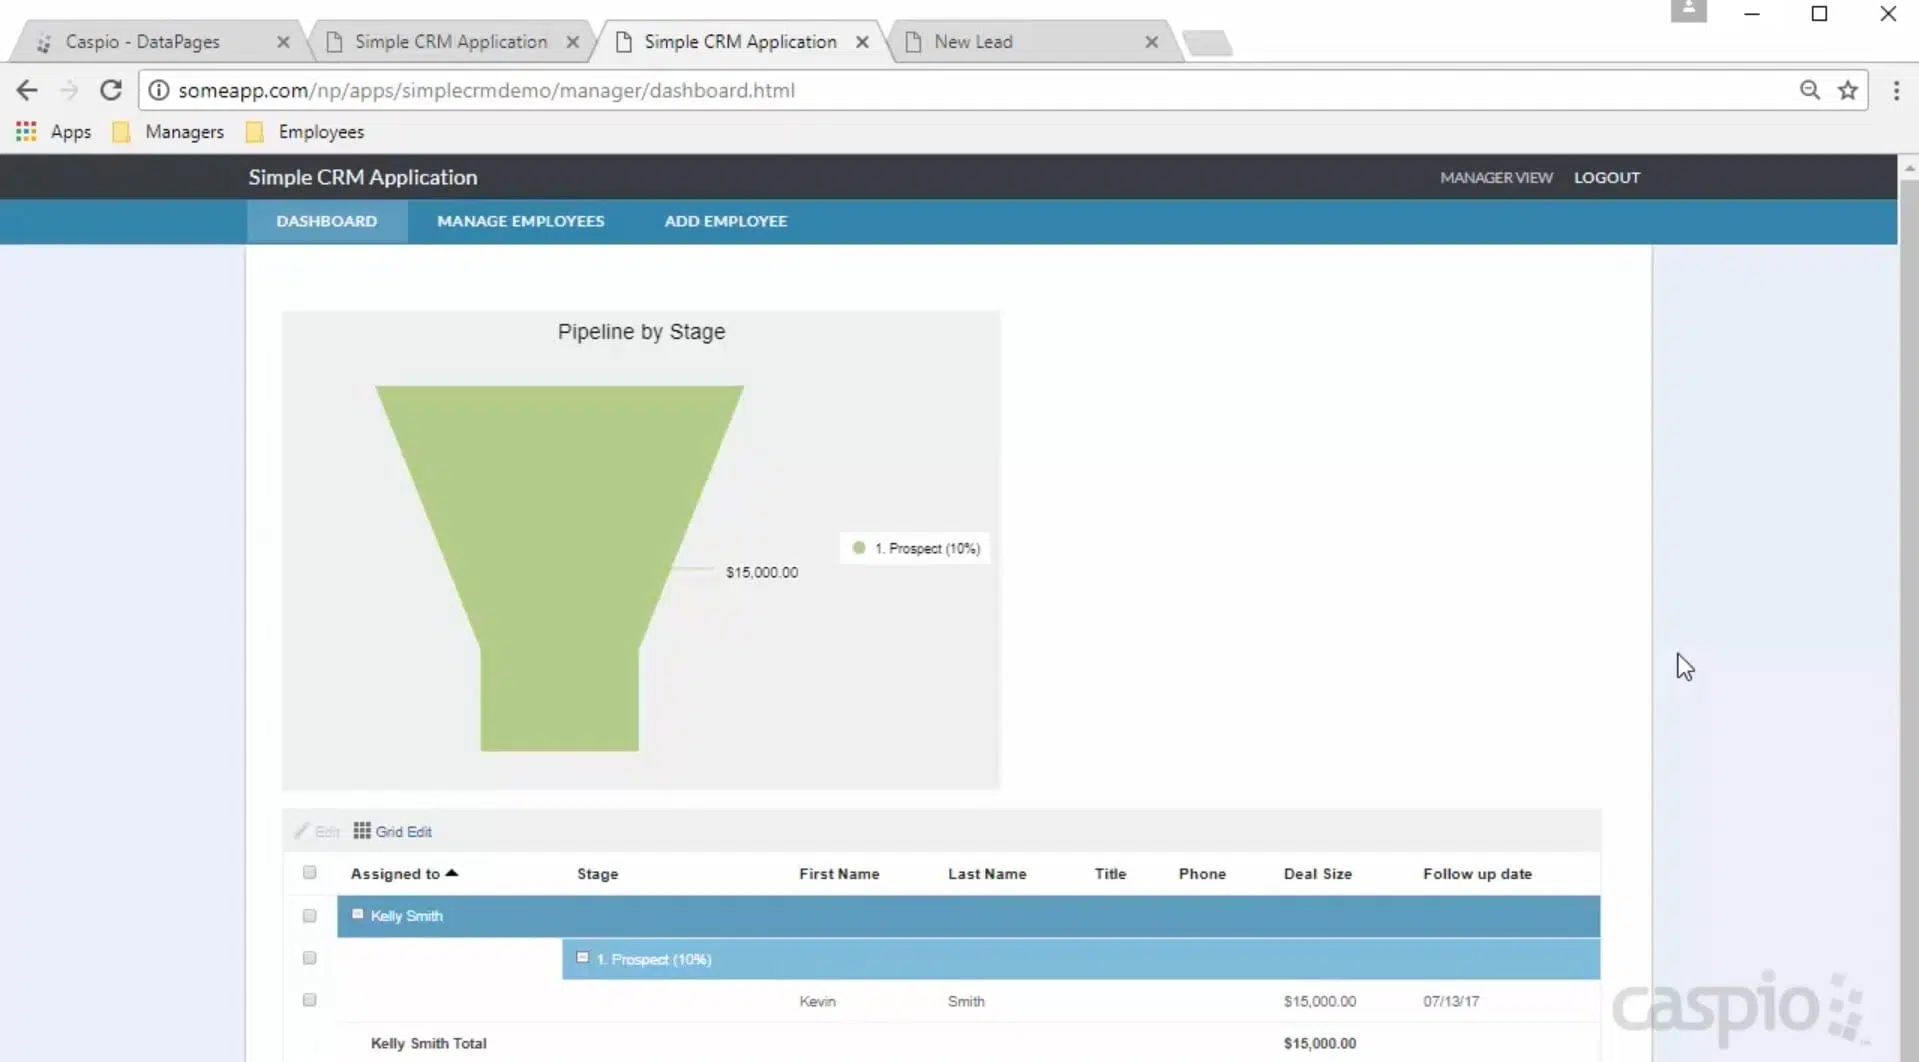 Screenshot of a sample CRM application designed on Caspio. It shows a “Dashboard” interface, featuring a graph and table.